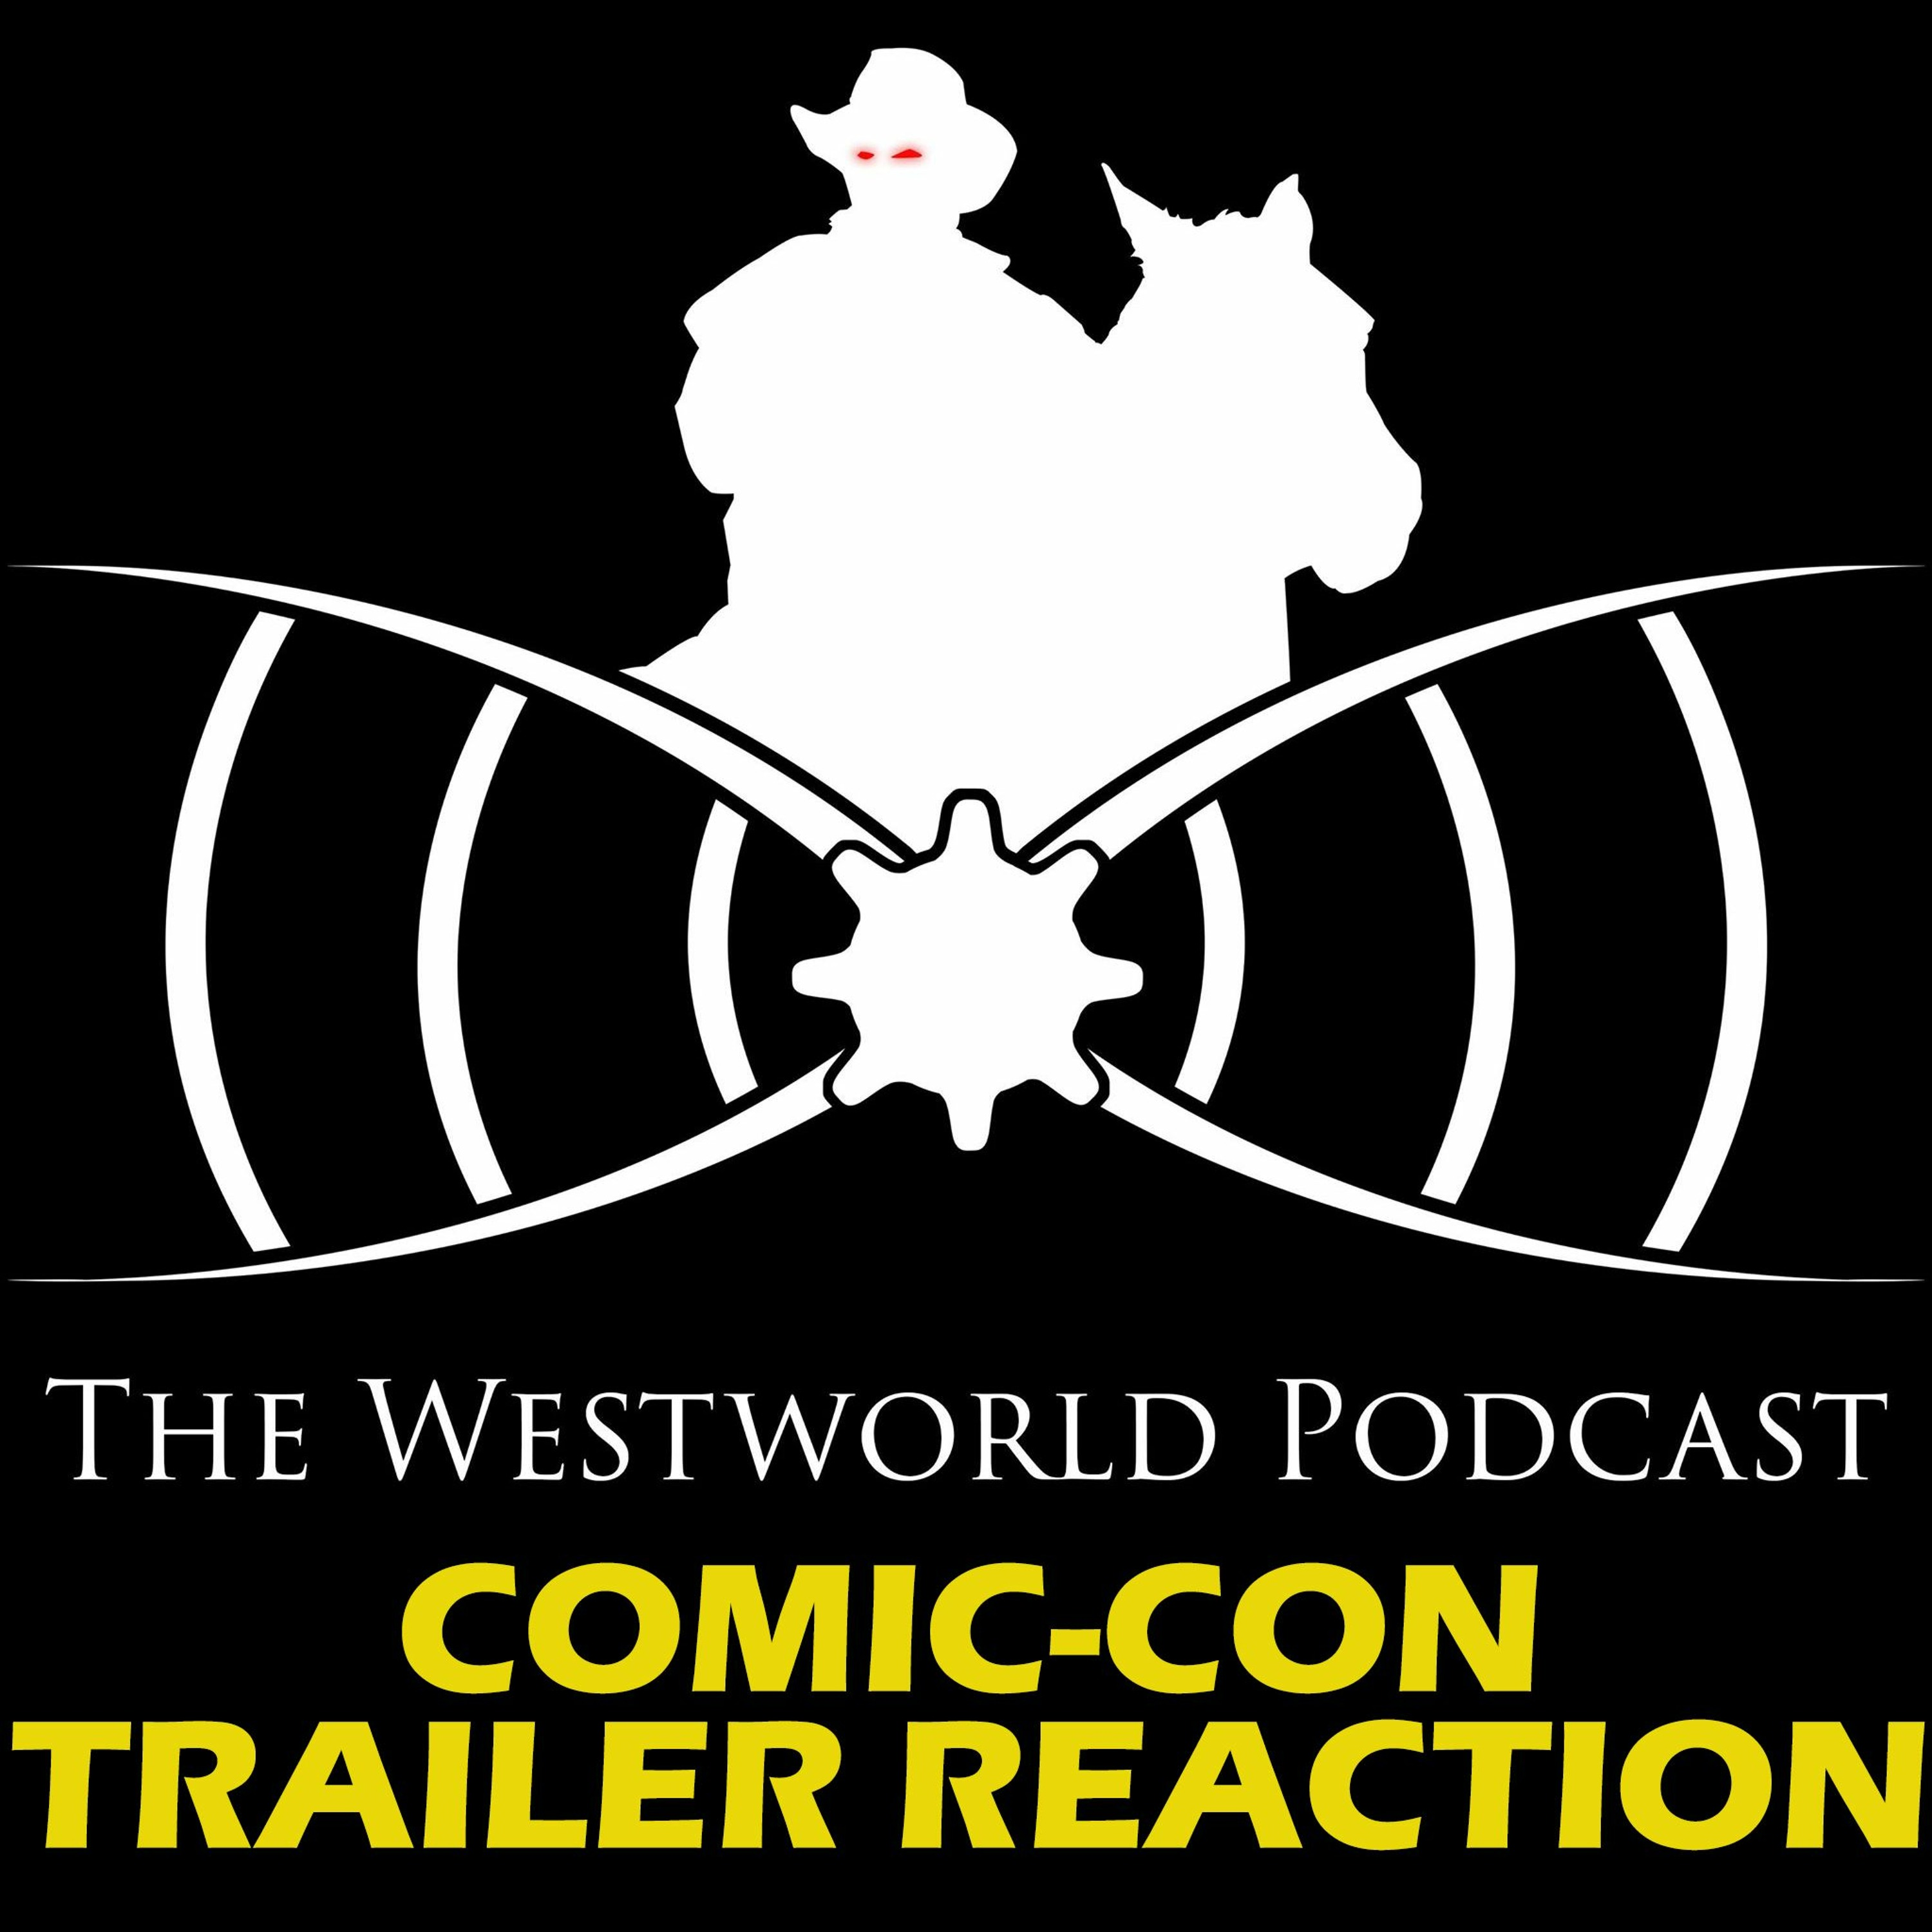 Westworld Trailer Reaction + HOT TAKES from the #HBOBOIZ